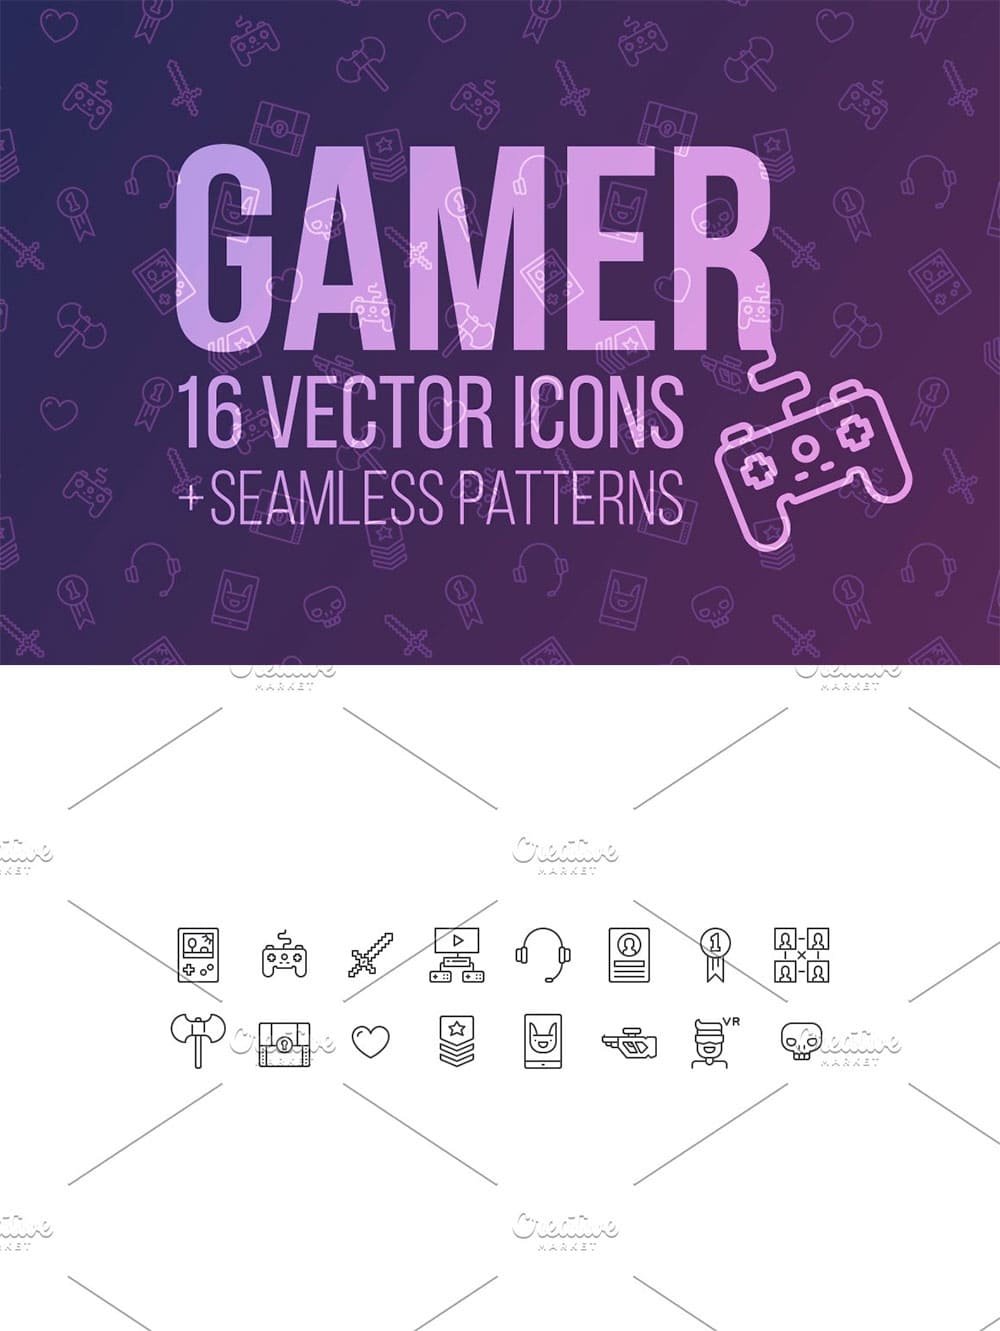 Gamer icons and patterns, picture for pinterest.